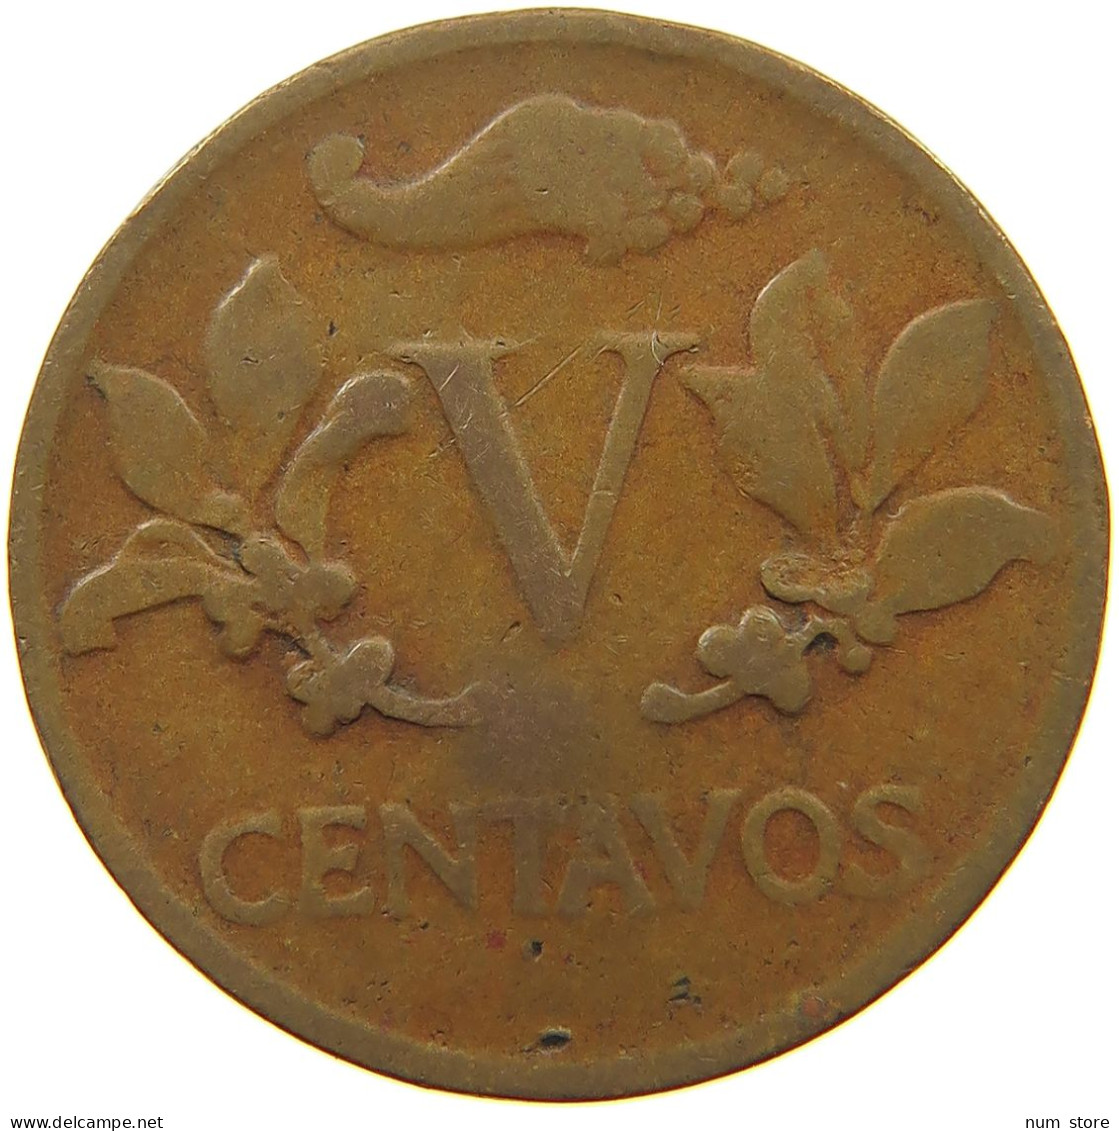 COLOMBIA 5 CENTAVOS 1944 #s055 0141 - Colombie